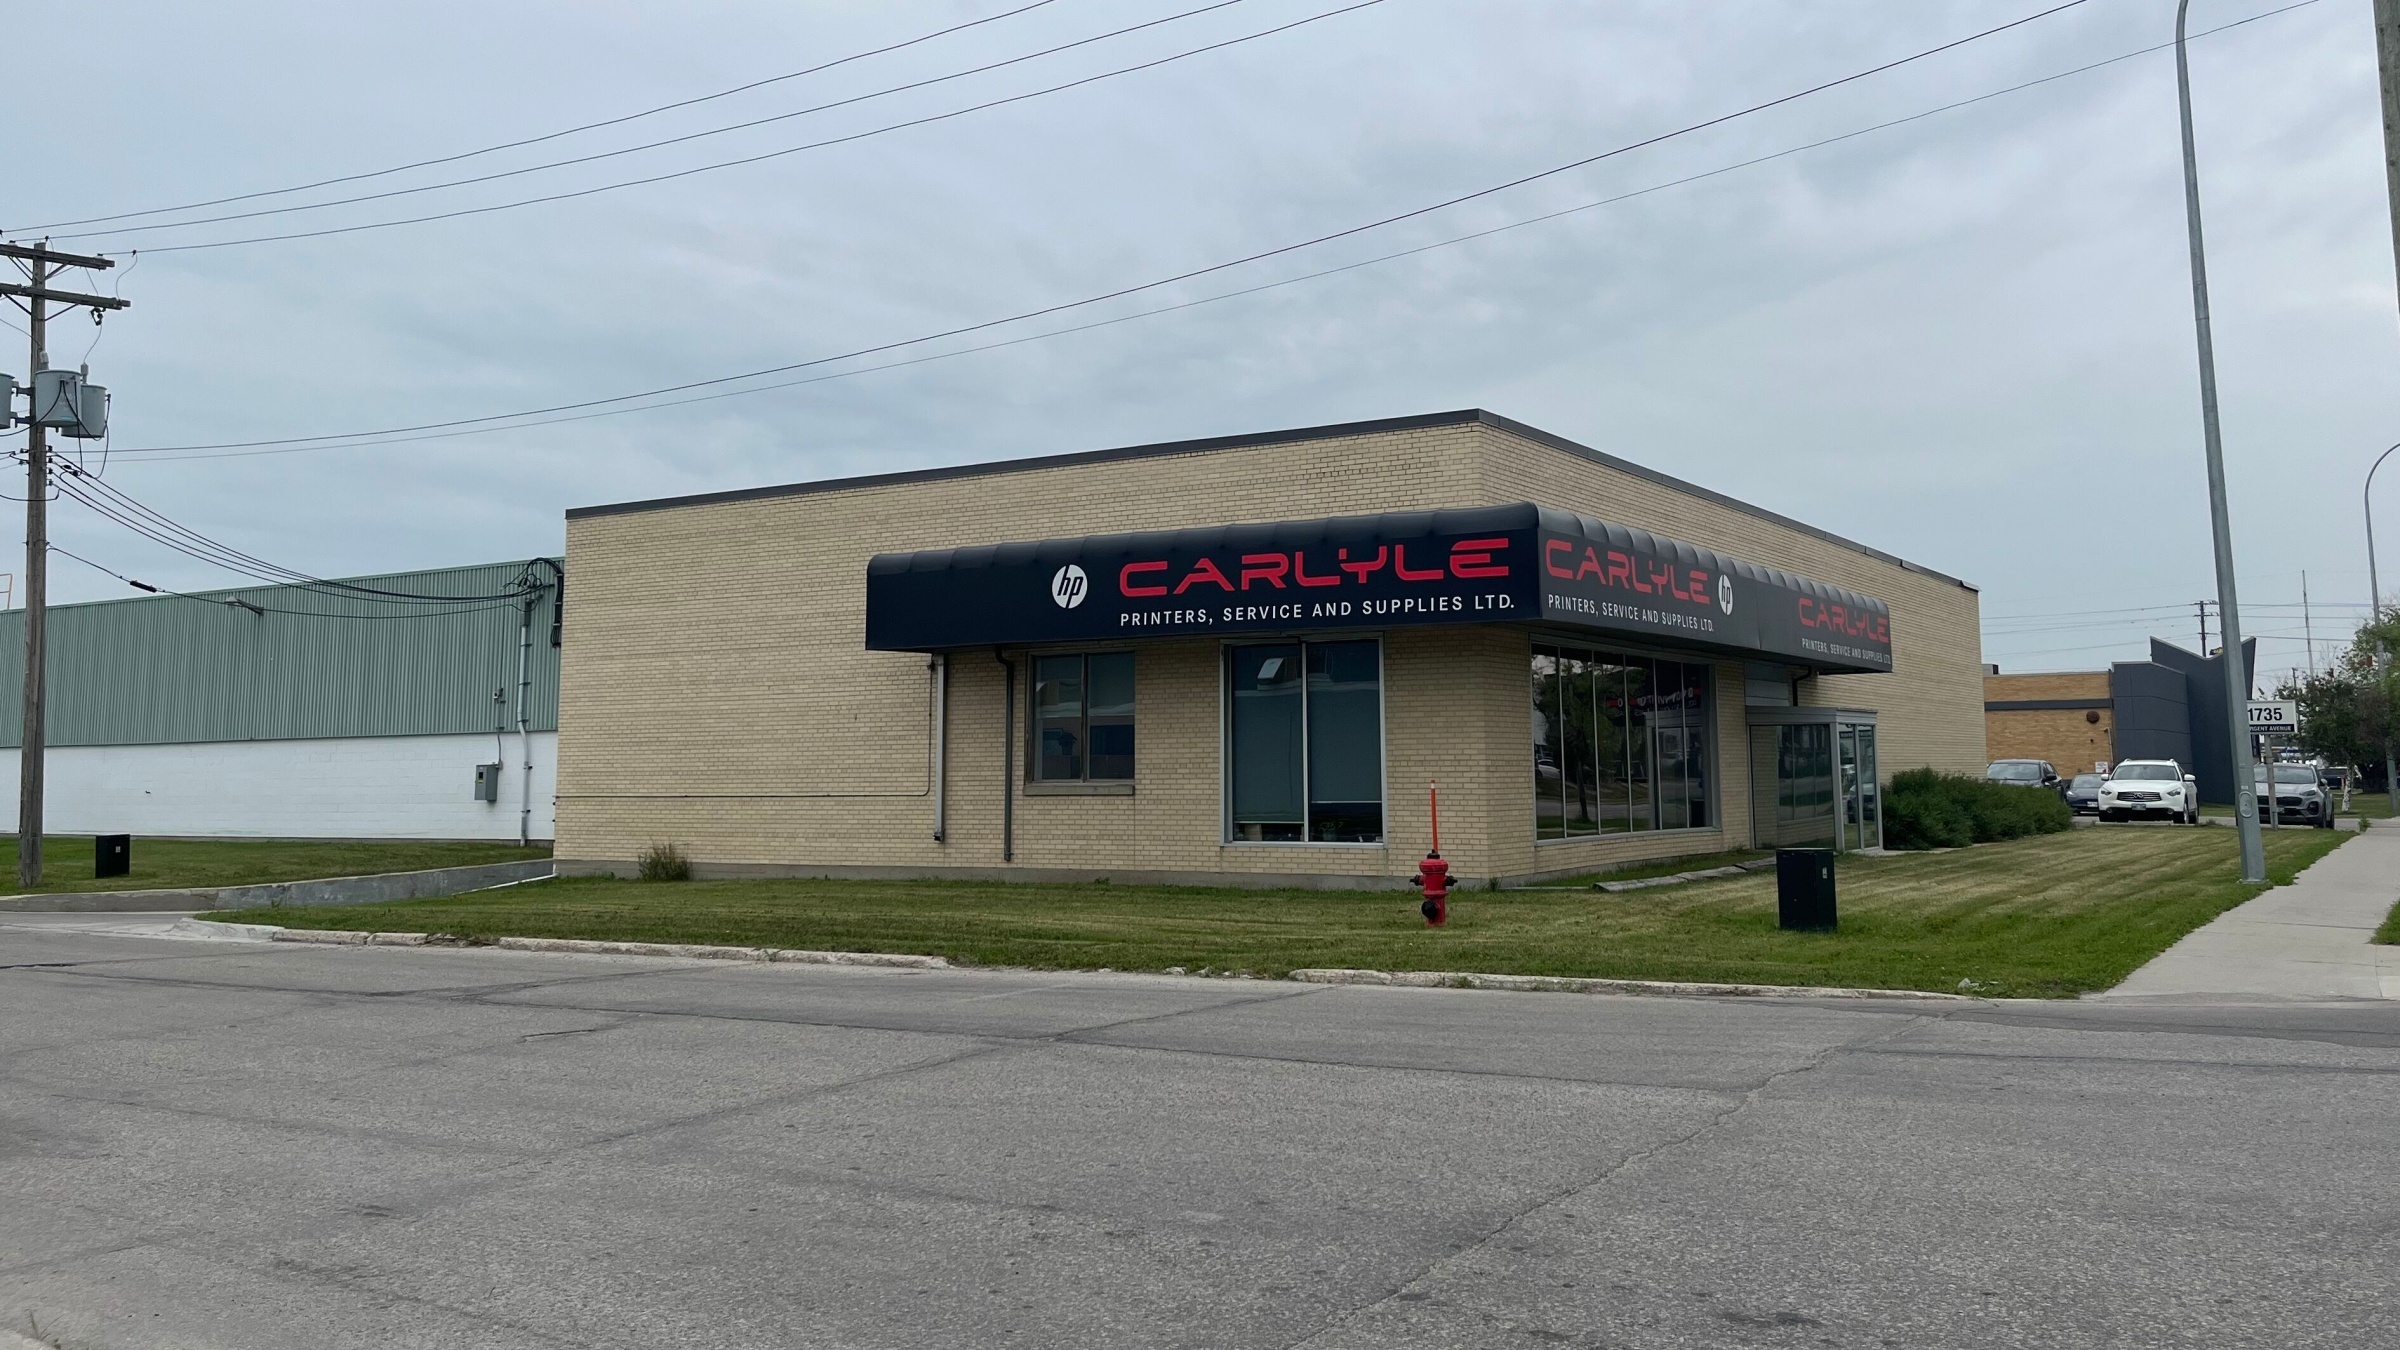 PROJECT FEATURE: CARLYLE PRINTERS, SERVICE & SUPPLIES